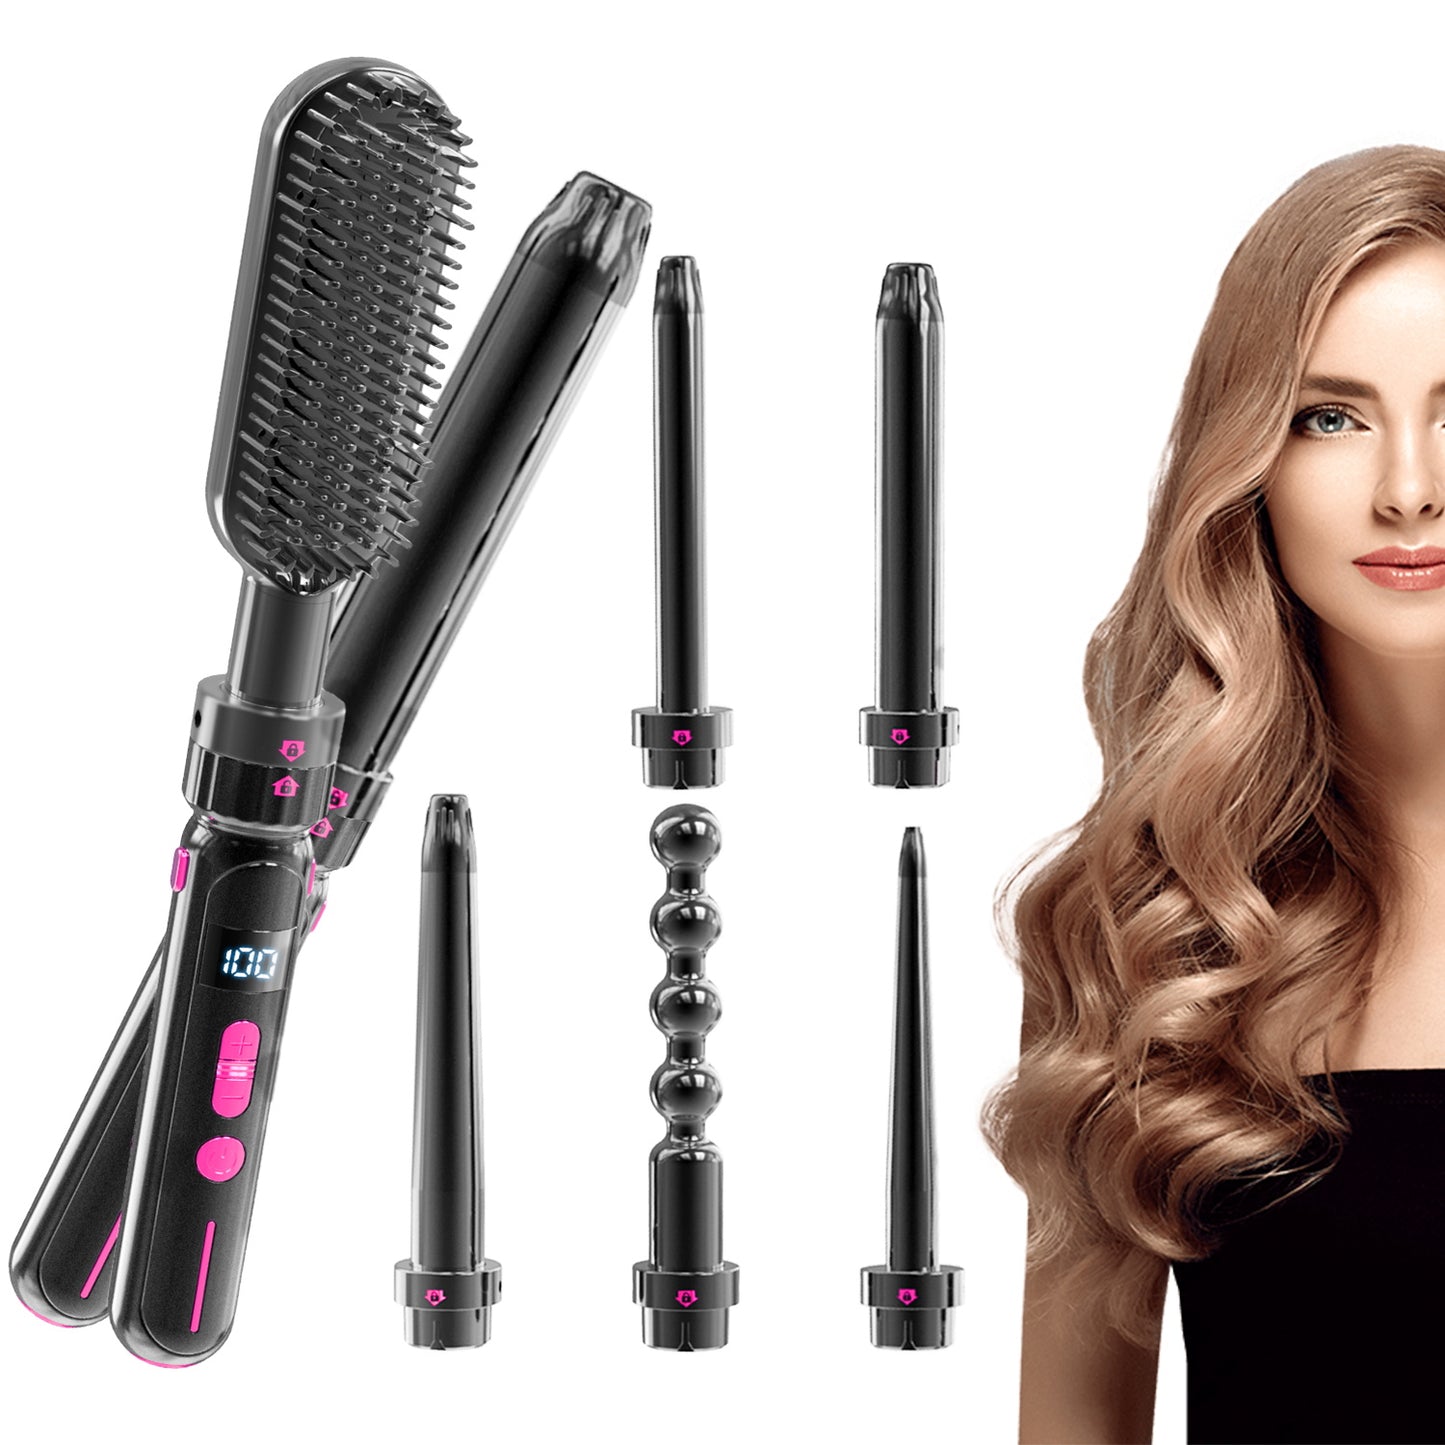 Curling Wand Set, Safety Against Scalding Easy To Use Curly Hair Sticks